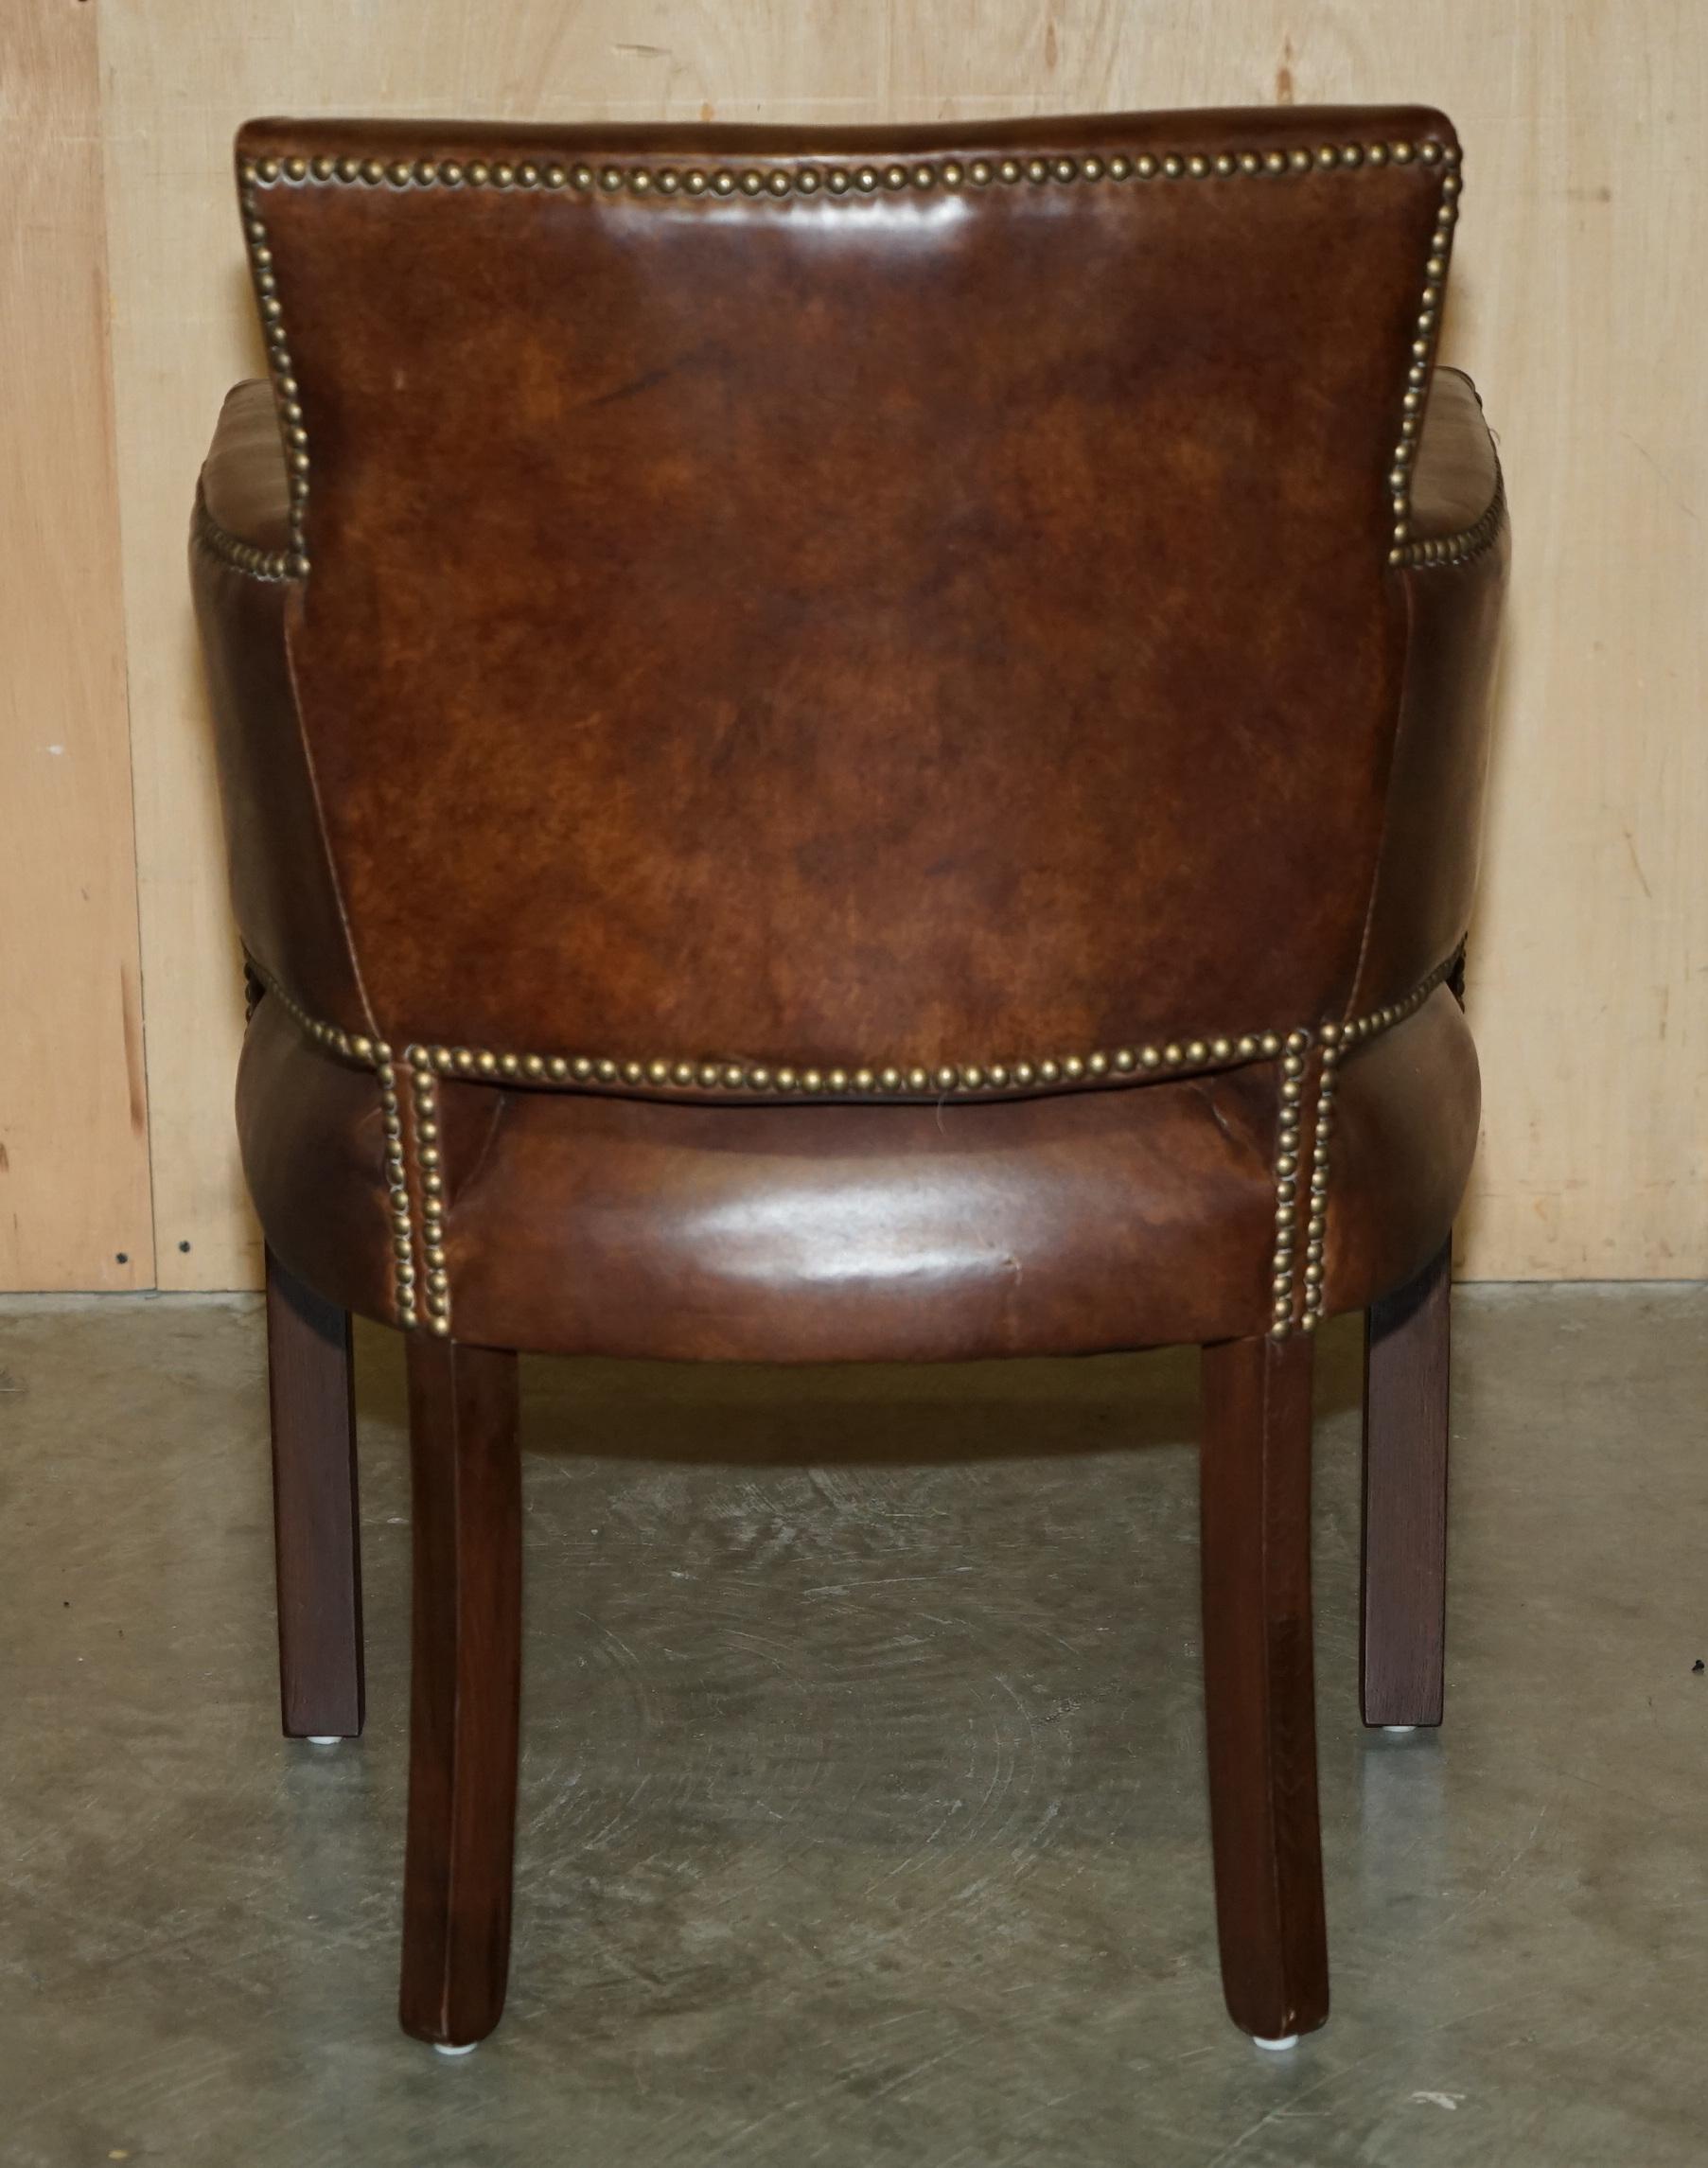 FINE PAIR OF ViNTAGE HALO HERITAGE BROWN LEATHER OCCASIONAL OR DINING CHAIRS 12